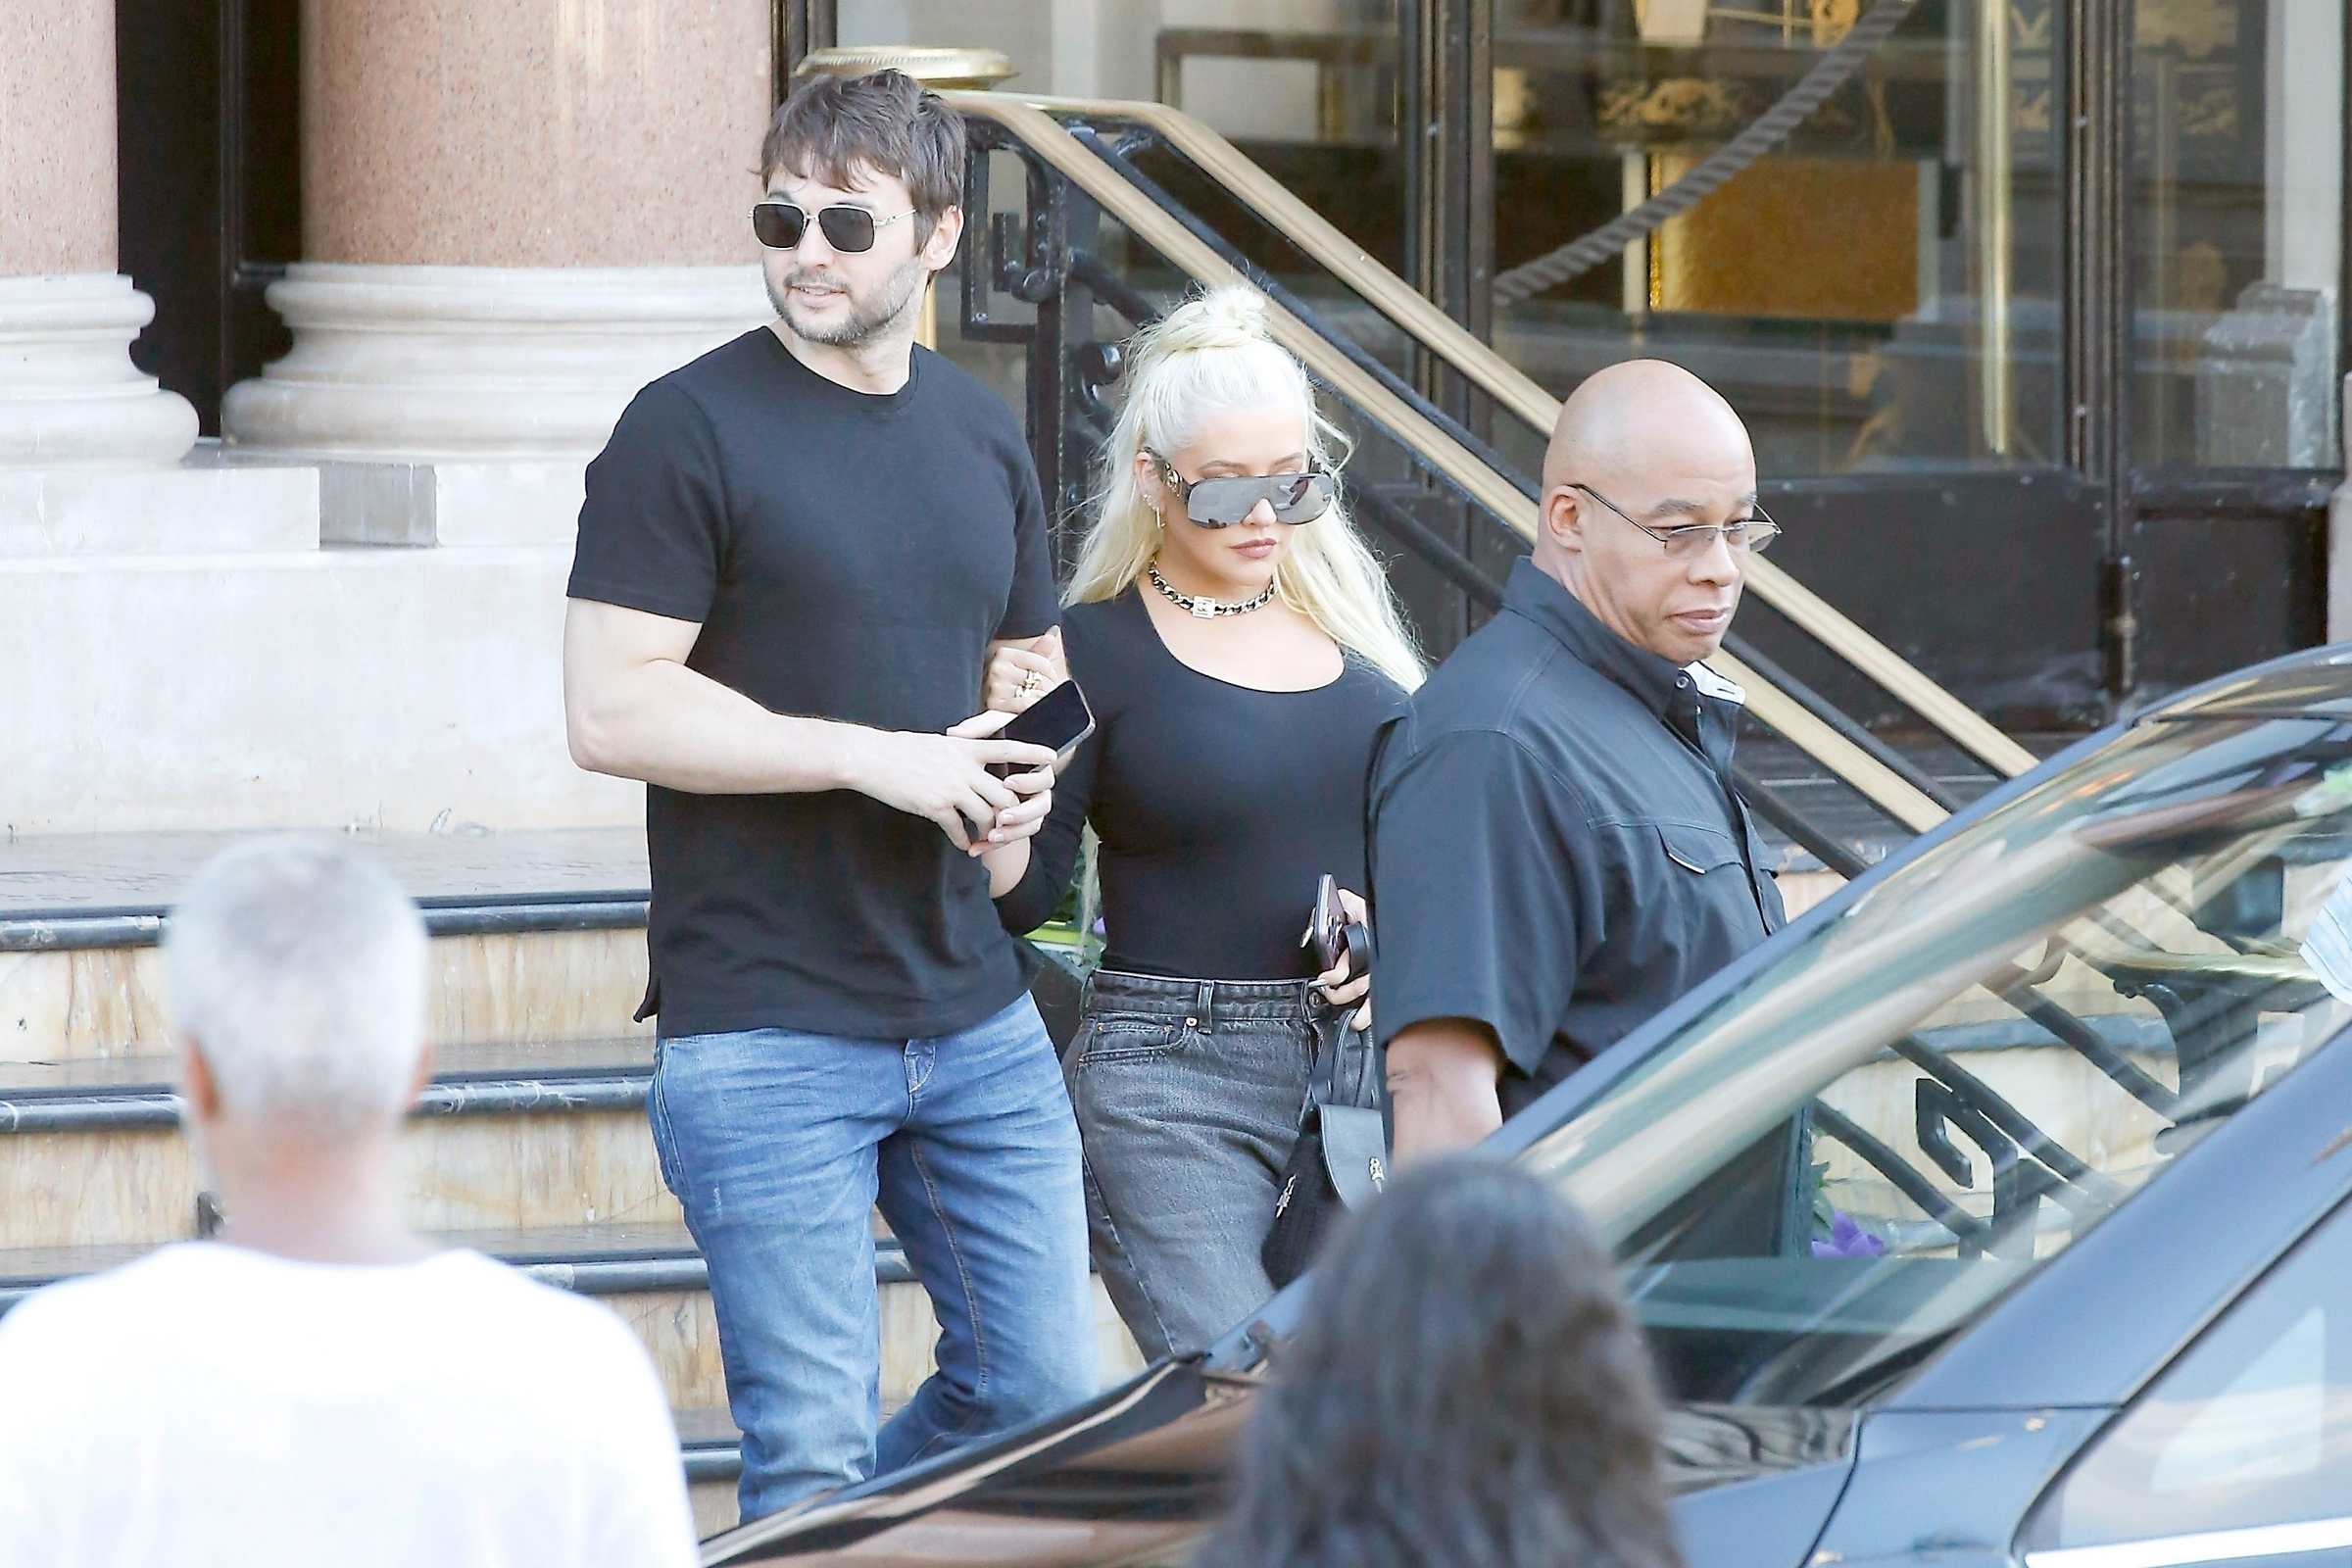 Christina Aguilera out and about in France on Aug 1